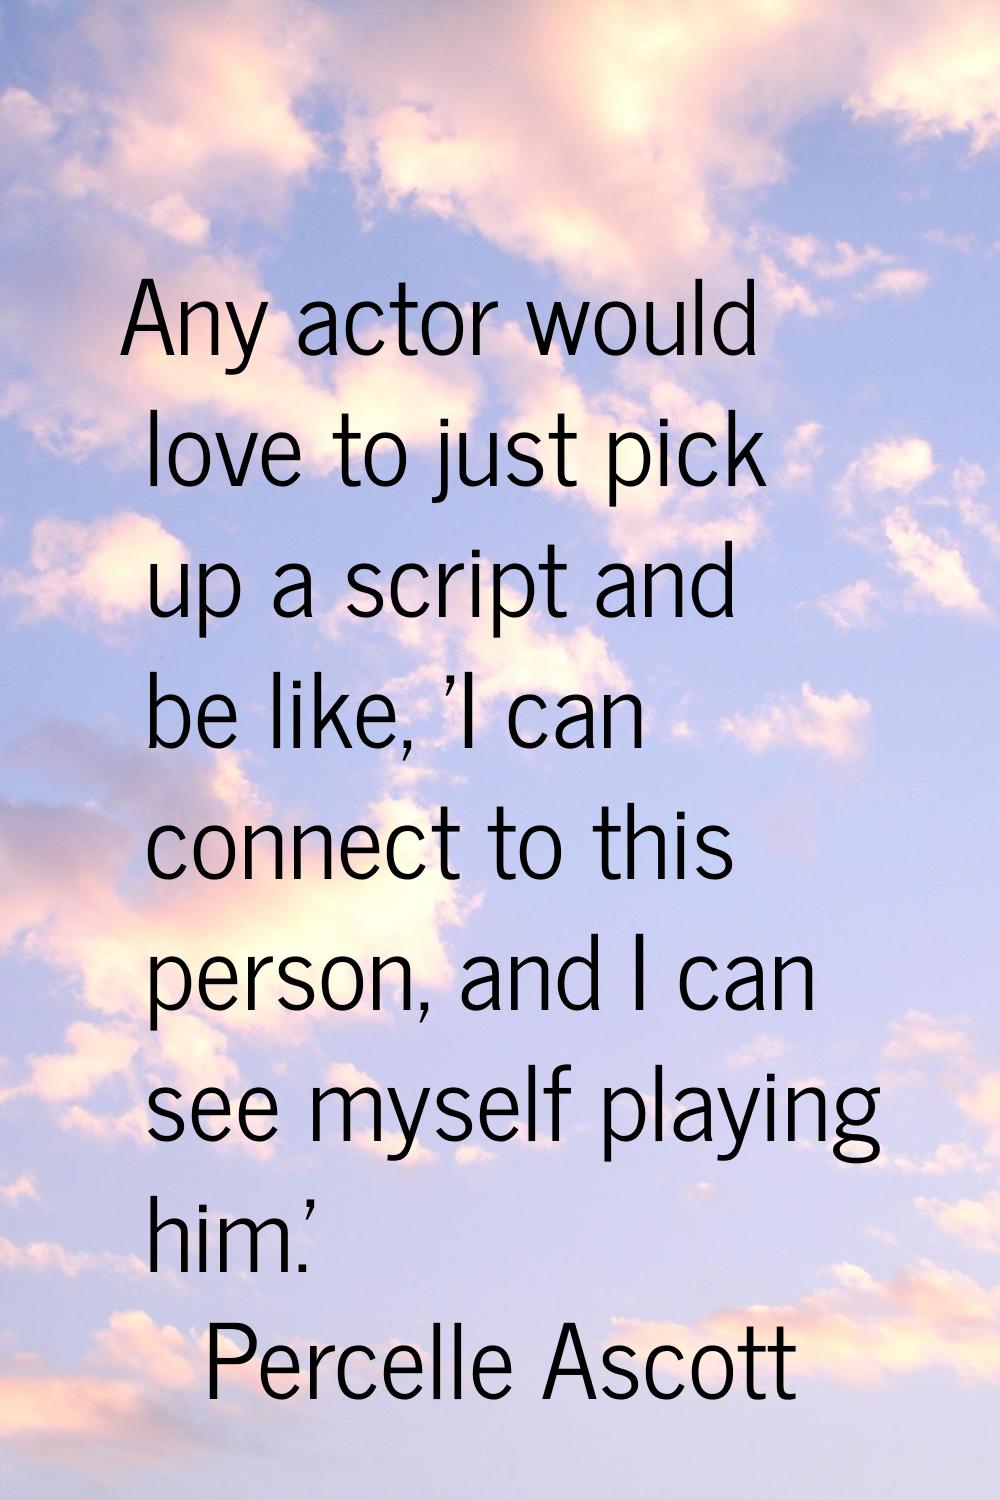 Any actor would love to just pick up a script and be like, 'I can connect to this person, and I can